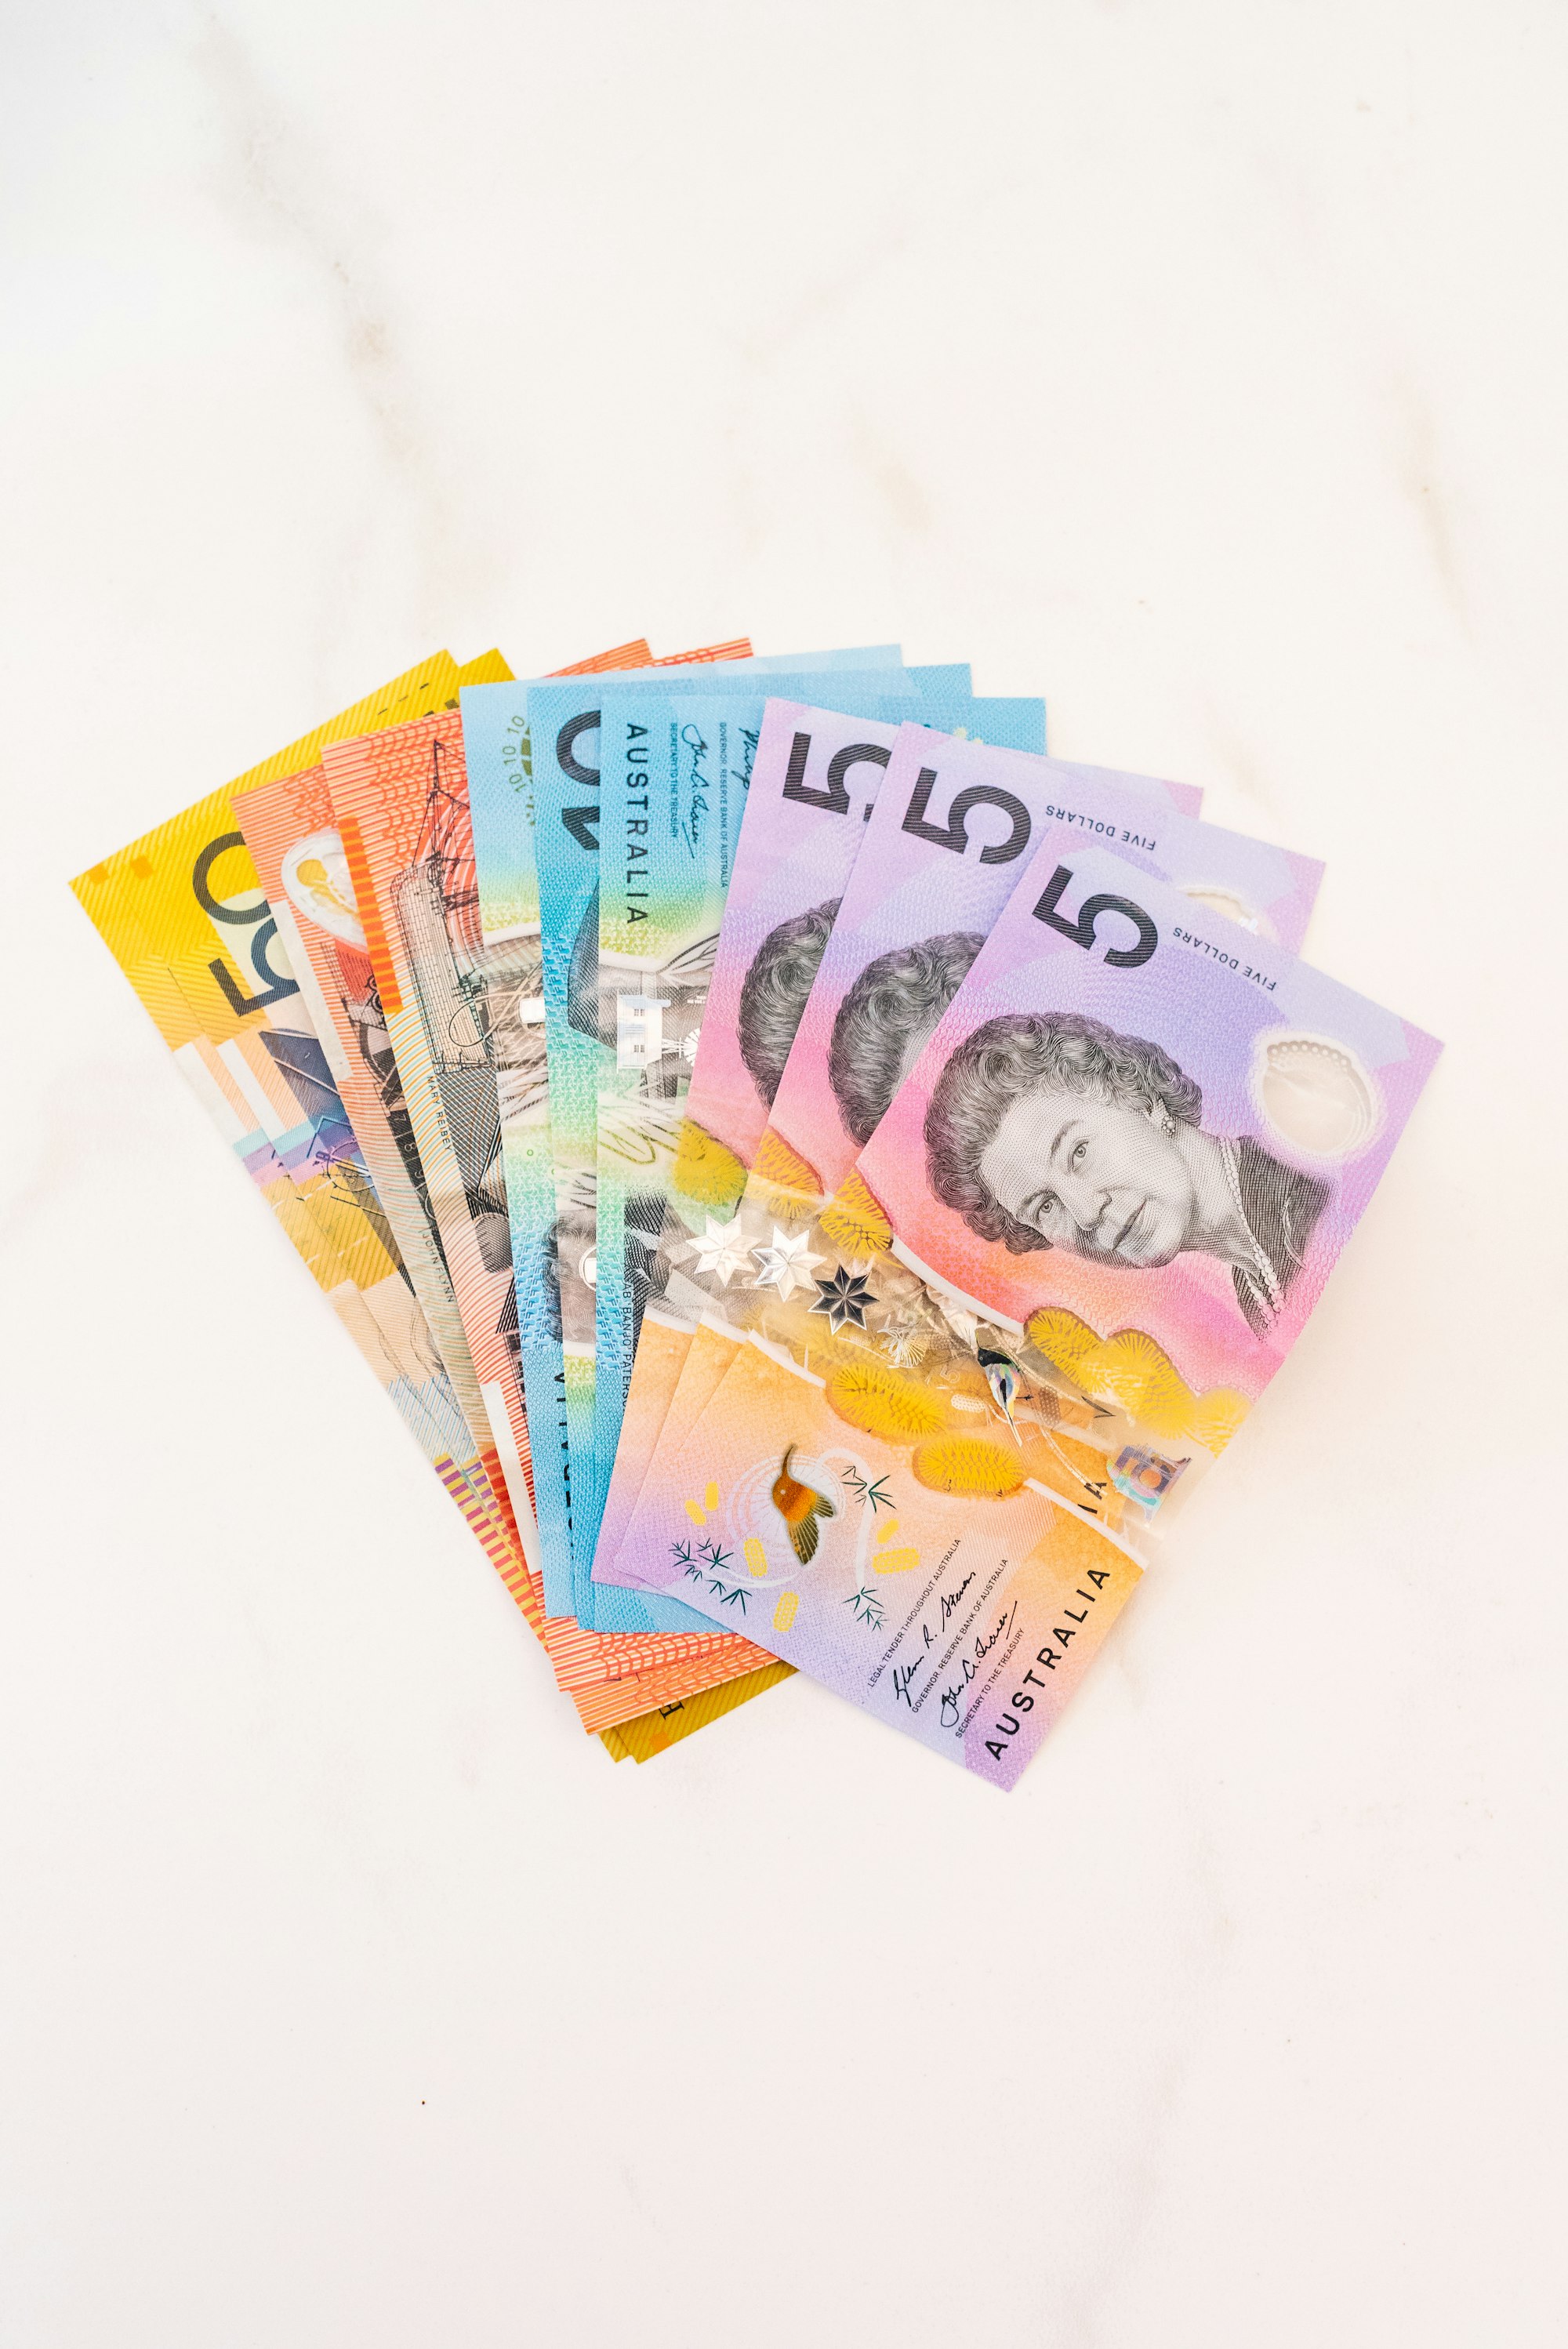 How strong will the Australian Dollar be in 2023?